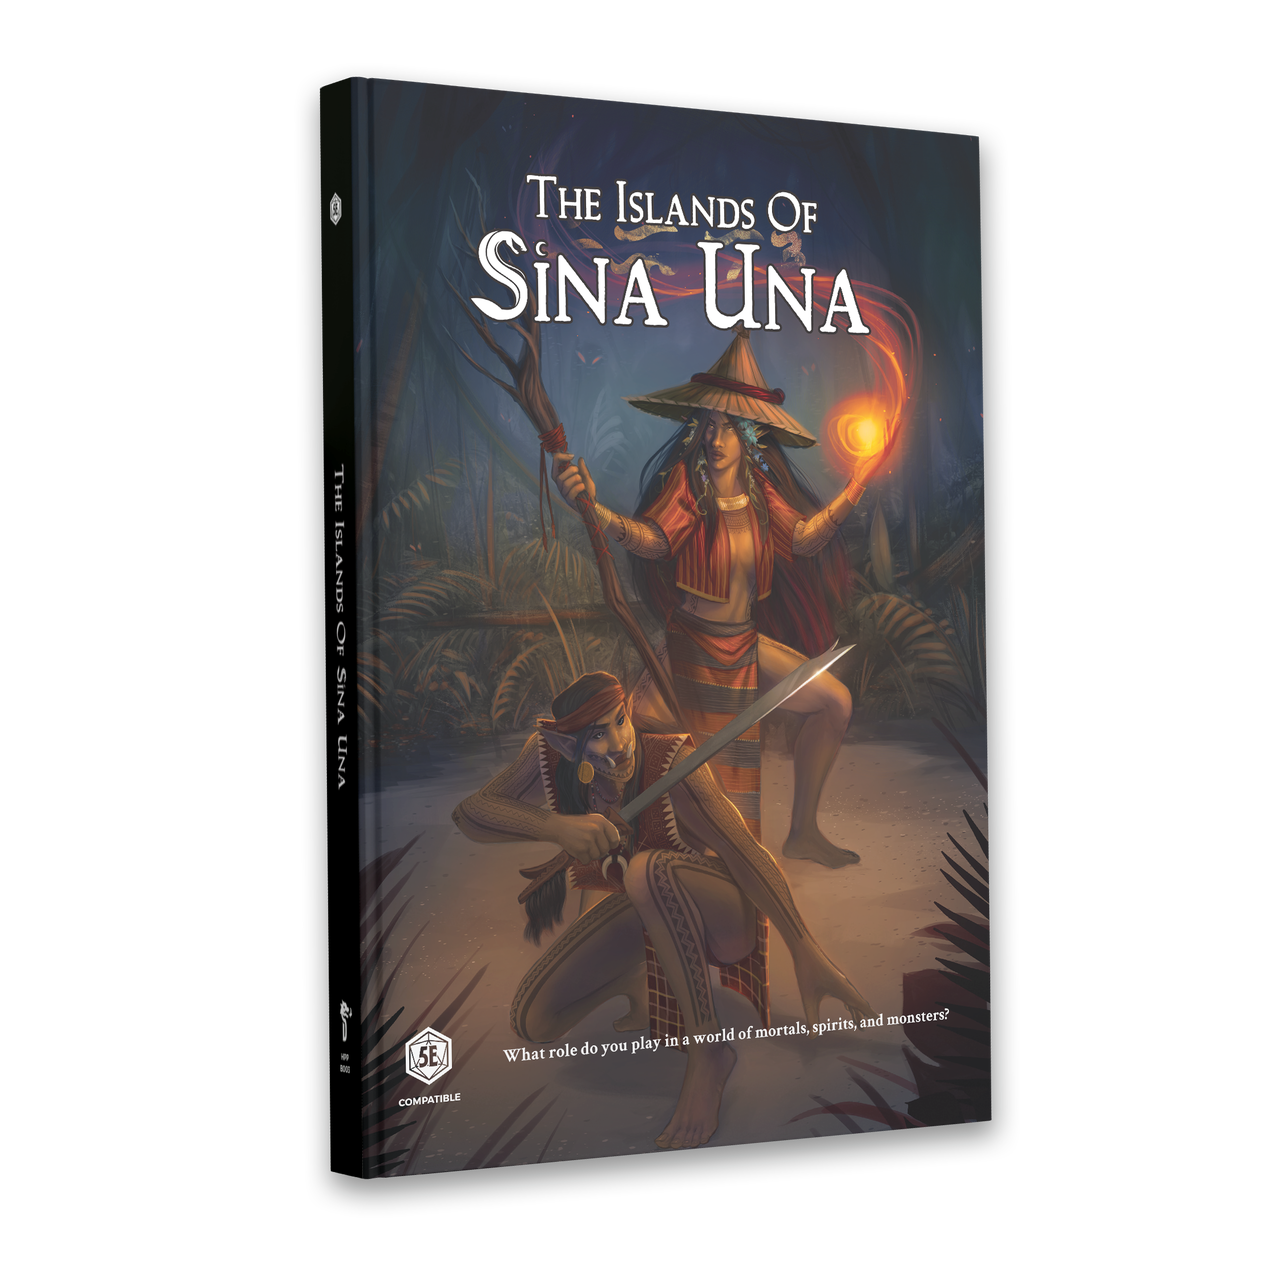 The cover of "The Islands of Sina Una"